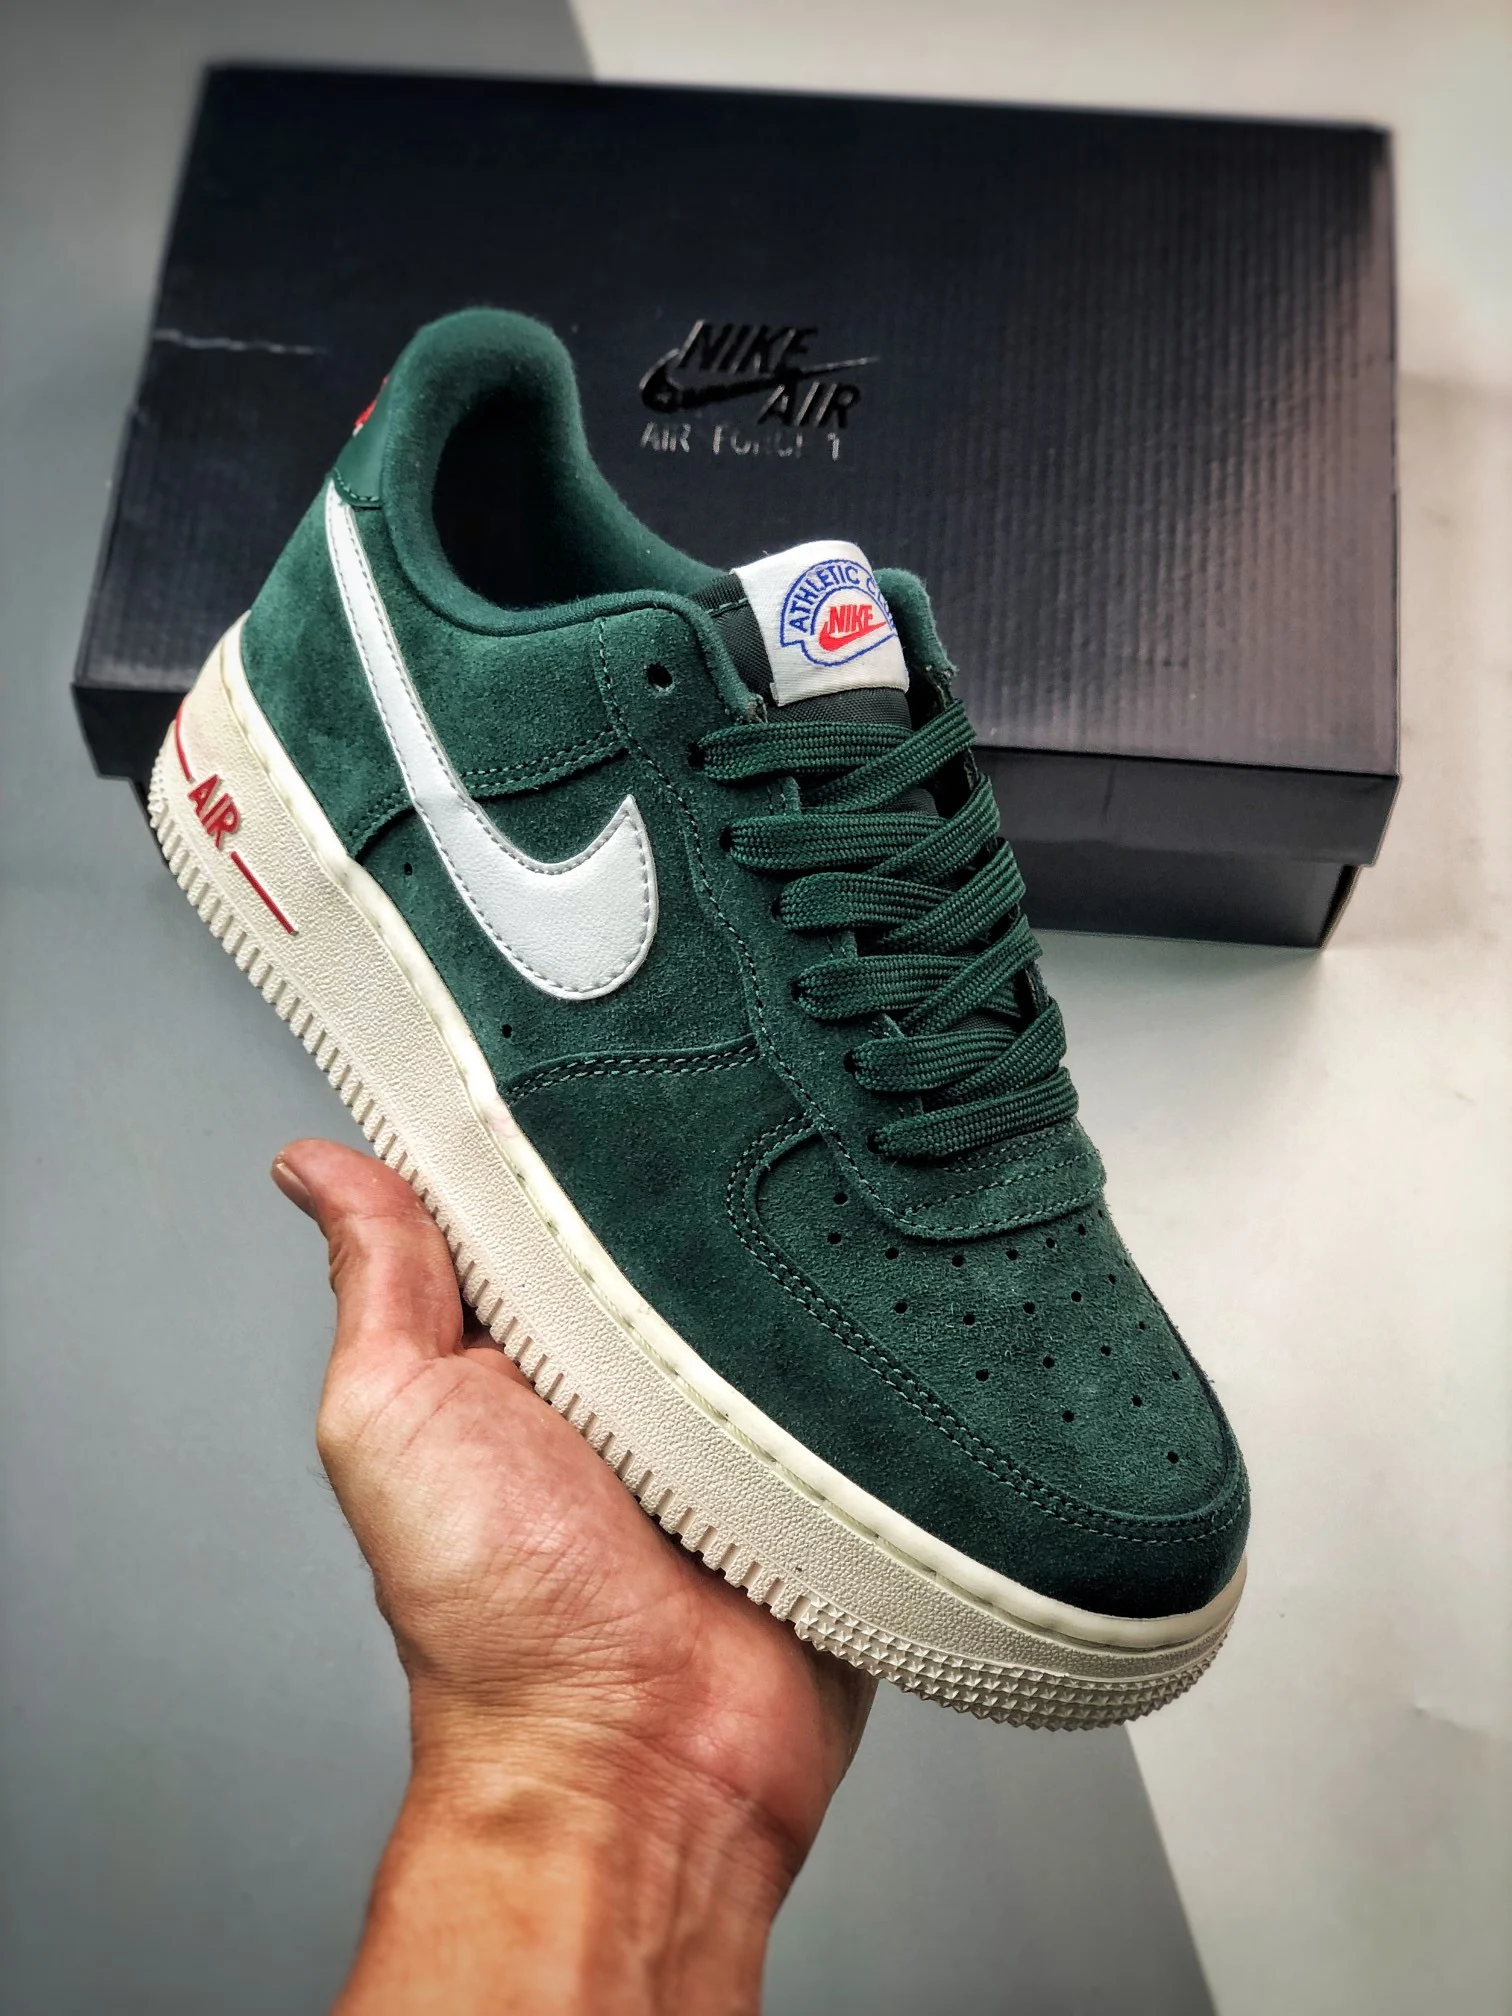 Nike Air Force 1 Low Athletic Club Pro Green White-Gym Red DH7435-300 For Sale